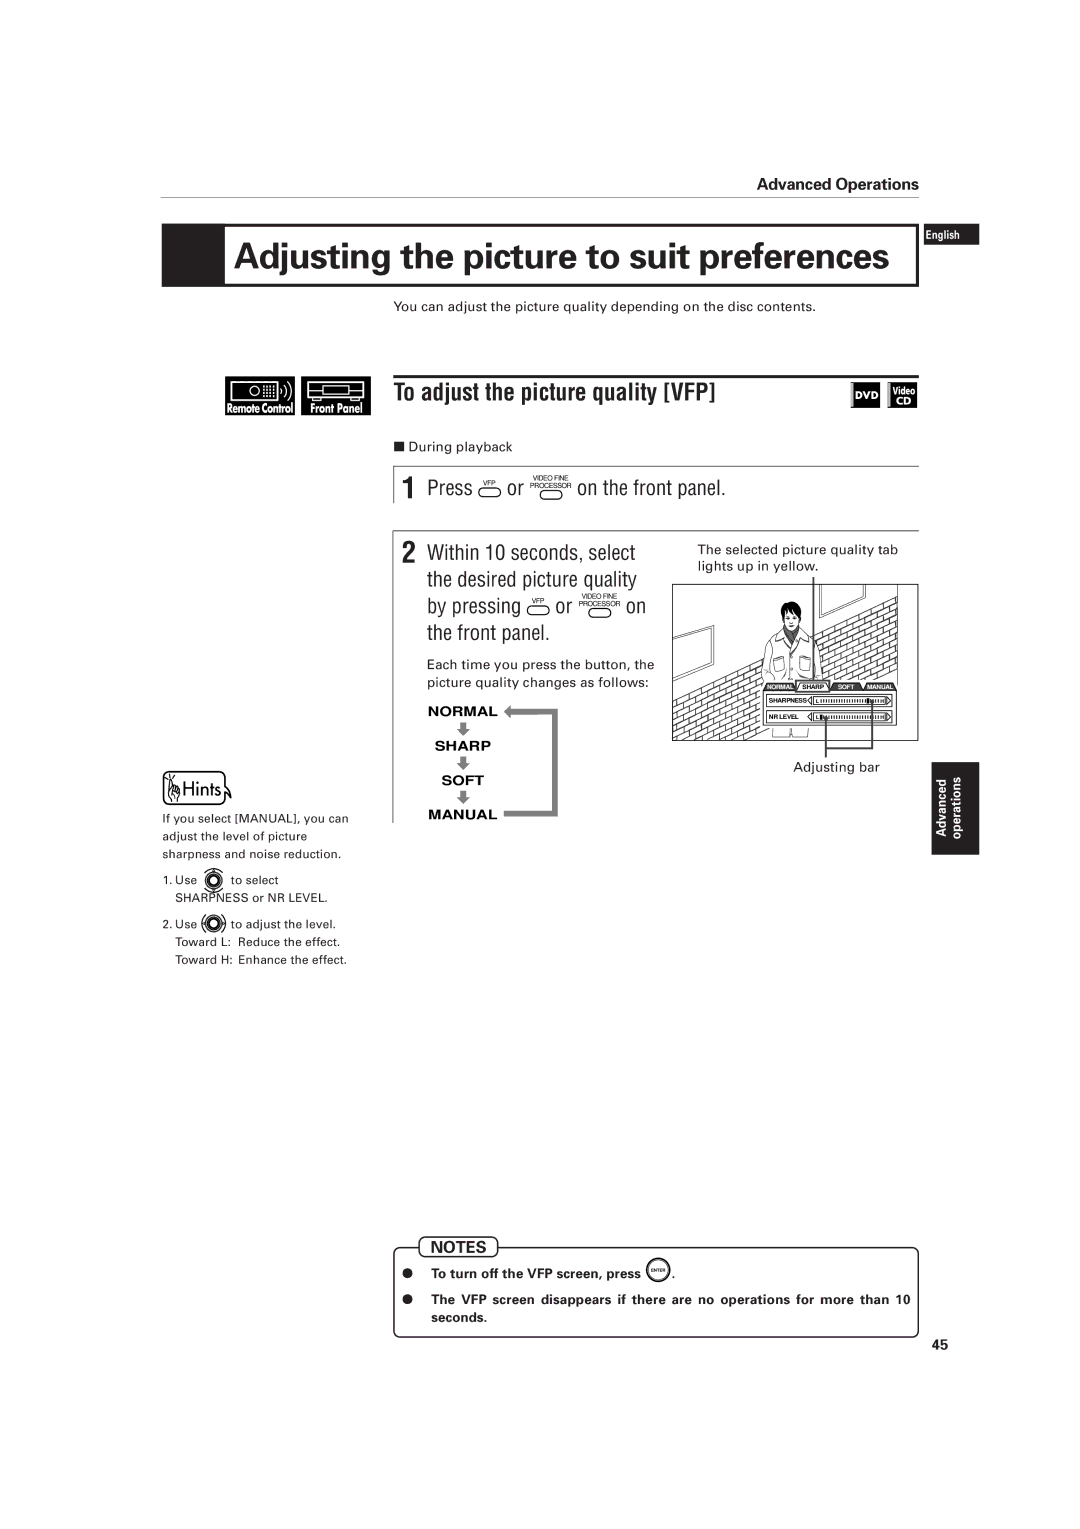 JVC XV-D701BK manual Adjusting the picture to suit preferences, To adjust the picture quality VFP 